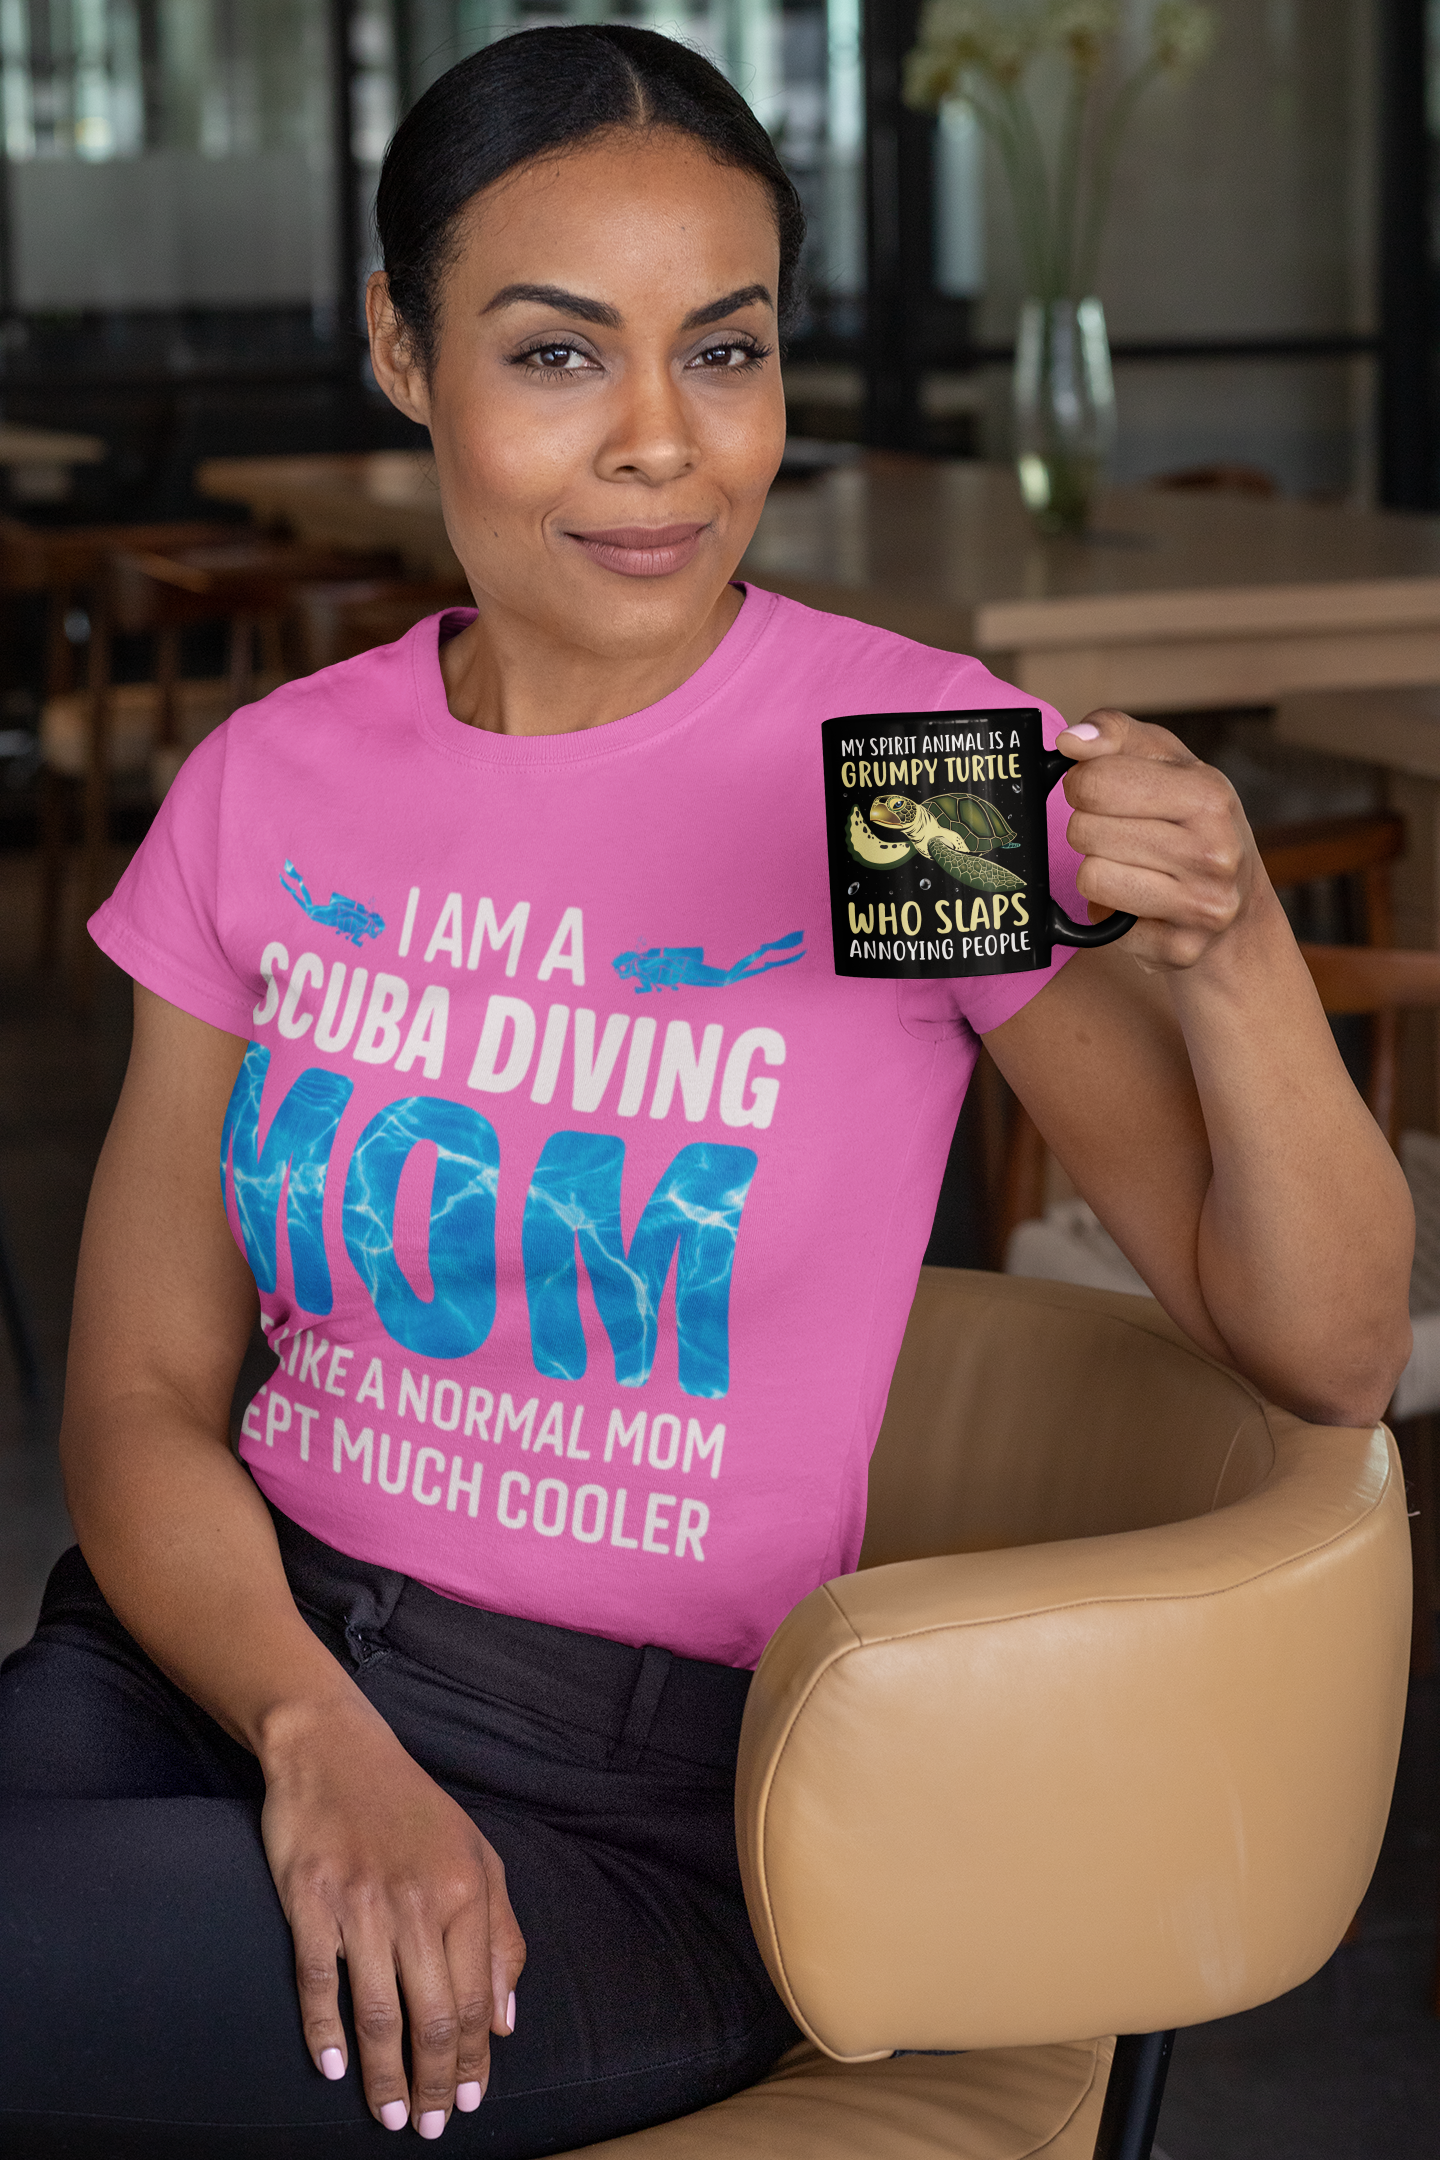 I am a scuba diving mom. Just like a normal mom except much cooler pink tshirt worn by woman holding grumpy turtle coffee cup